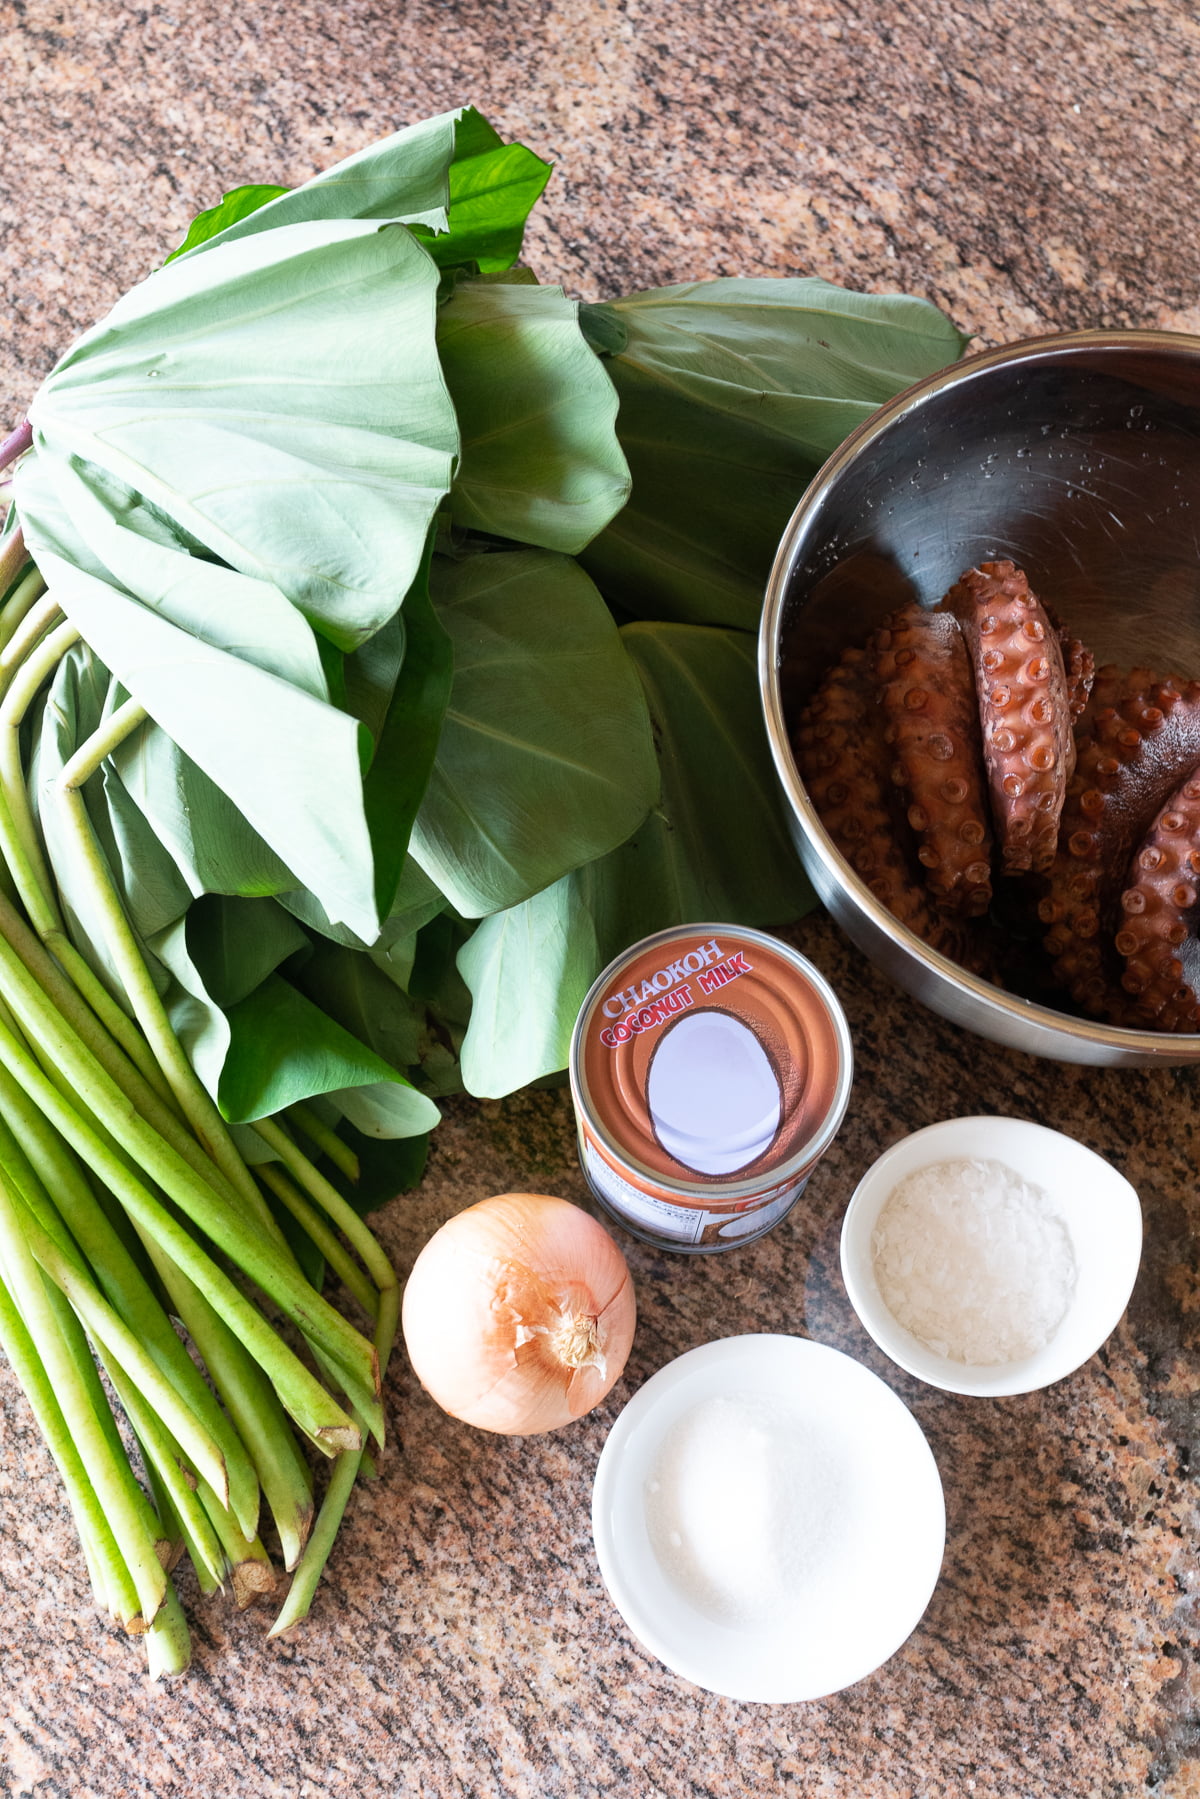 Ingredients for squid luau on a table (luau leaves, tako/octopus which can be used instead of squid, coconut milk, sugar, salt, and onions).